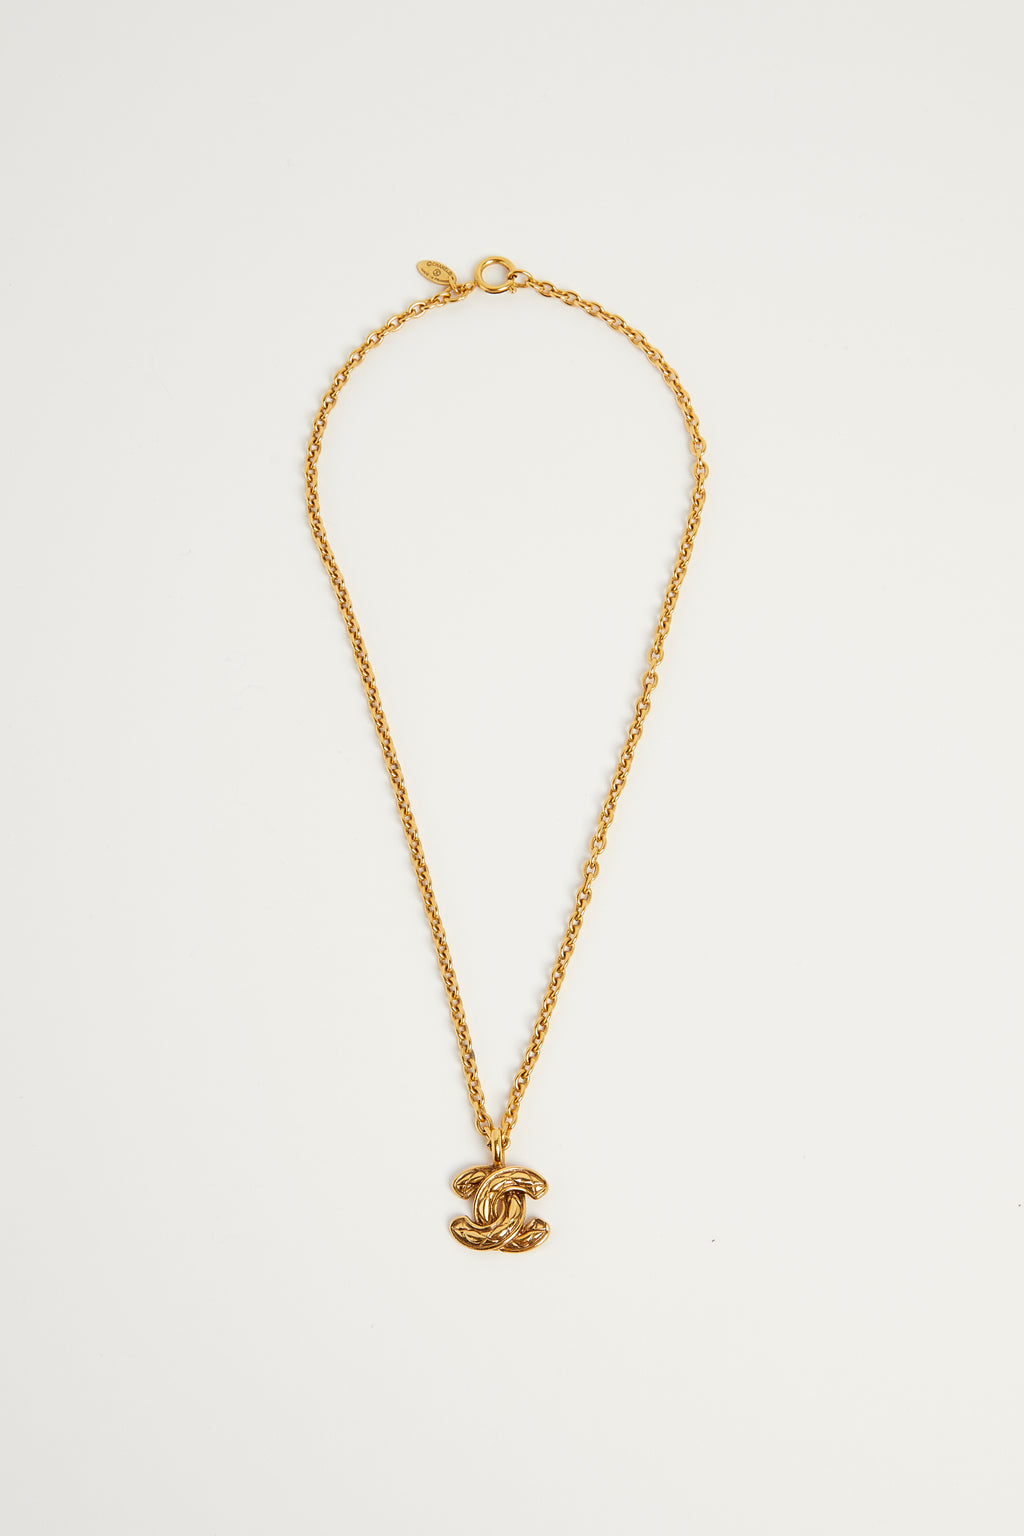 Vintage Chanel CC 24k Gold Plated Necklace